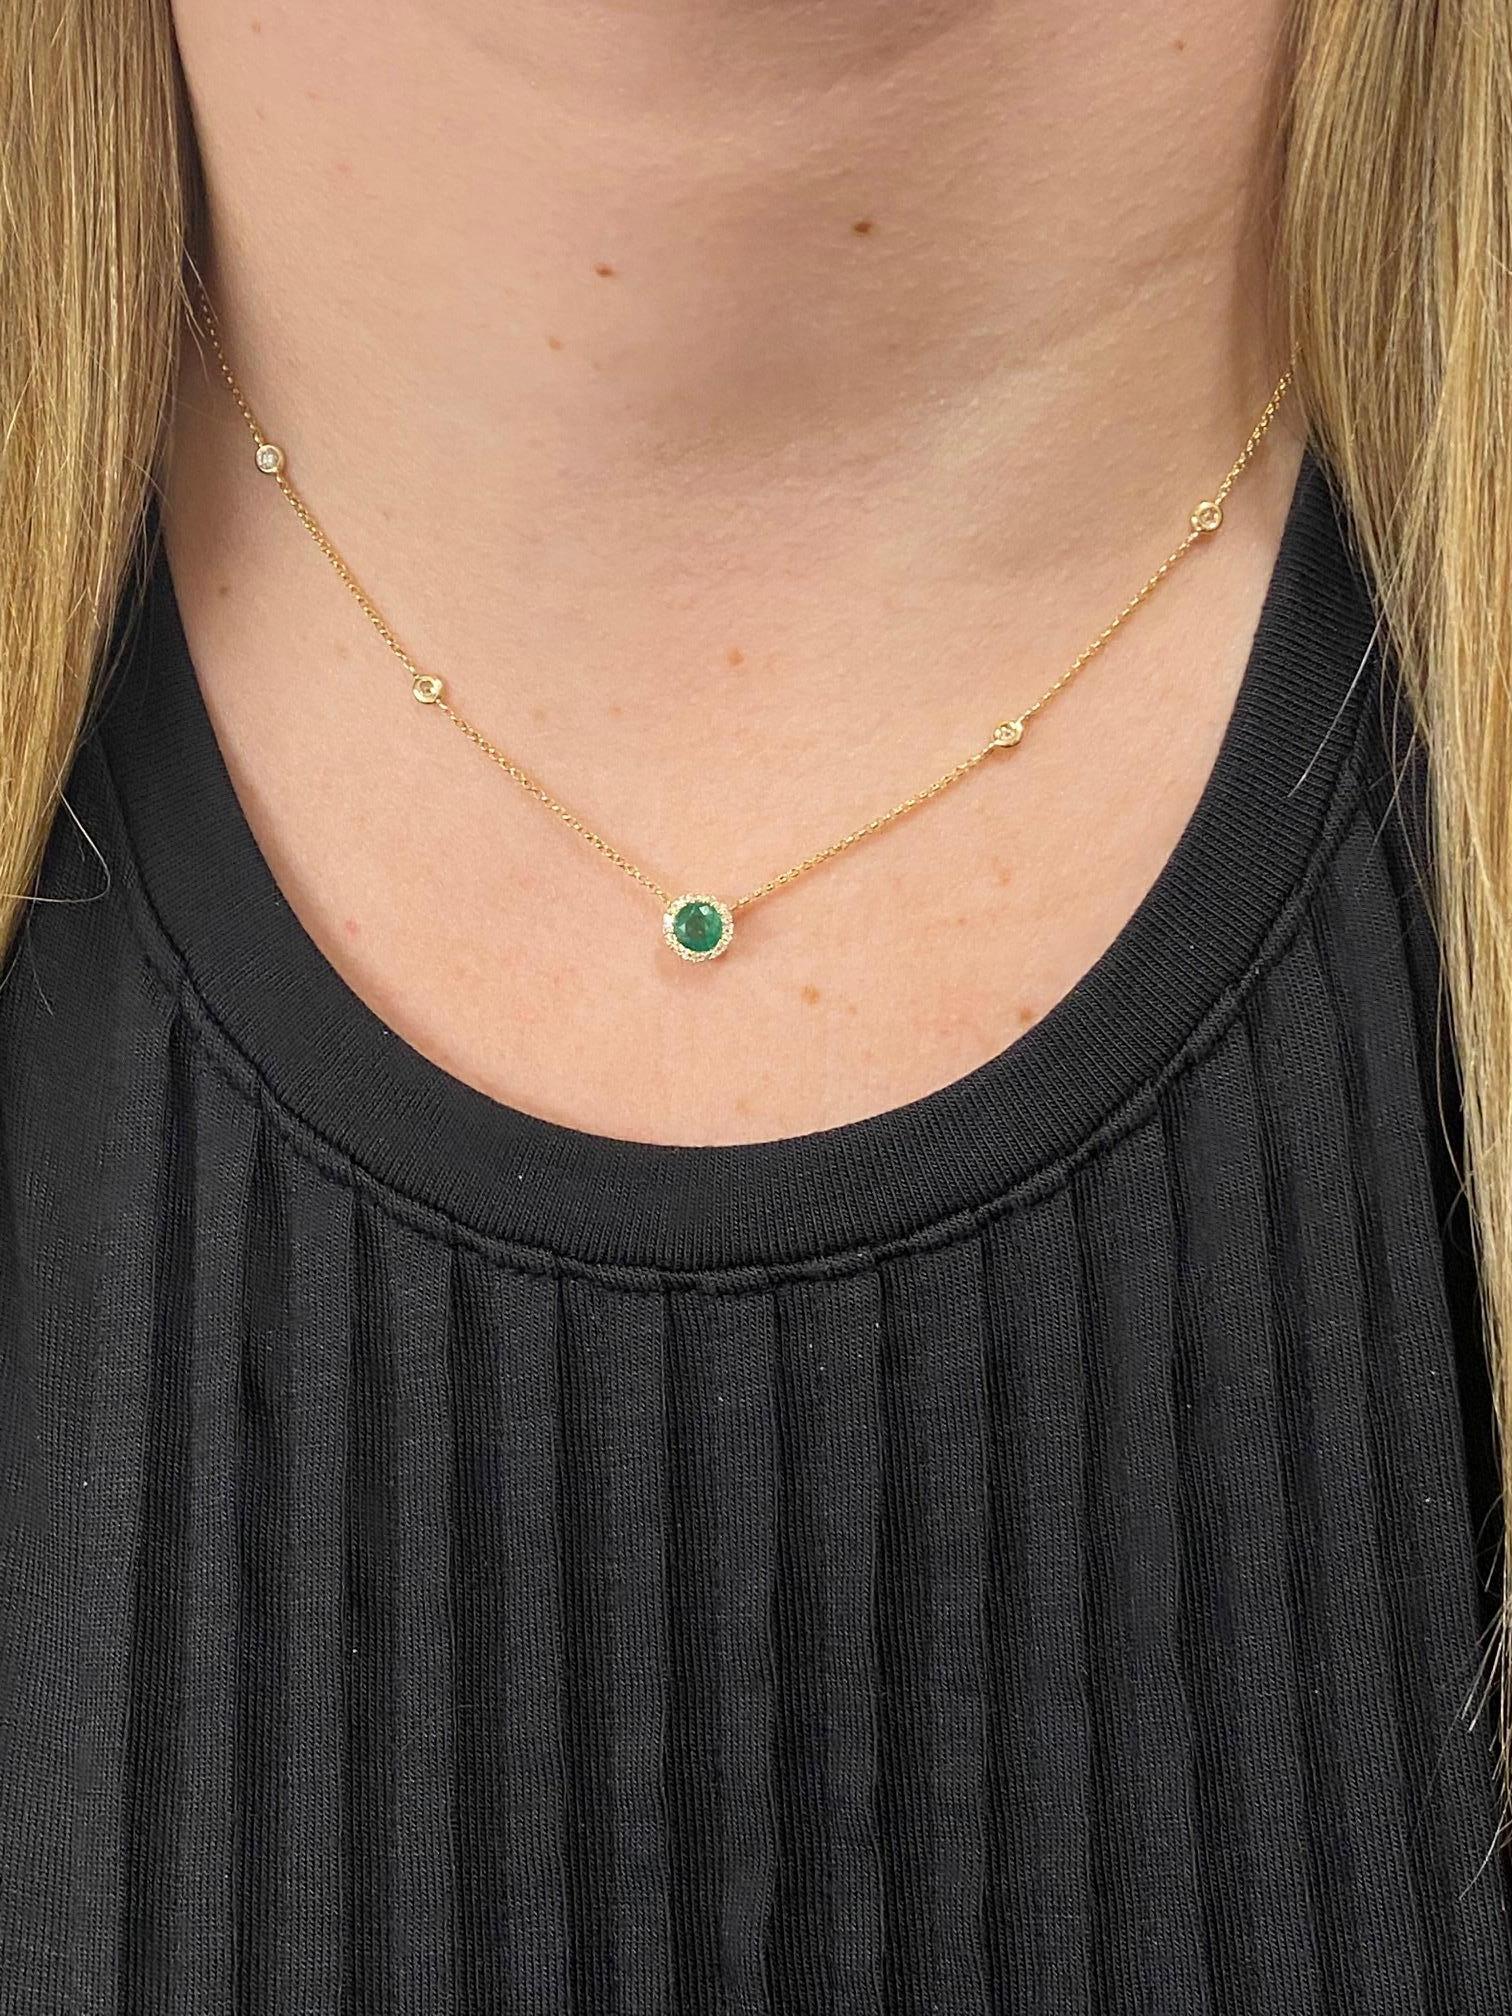 Round Cut Effy Brasilica 14K Yellow Gold Emerald and Diamond by The Yard Necklace